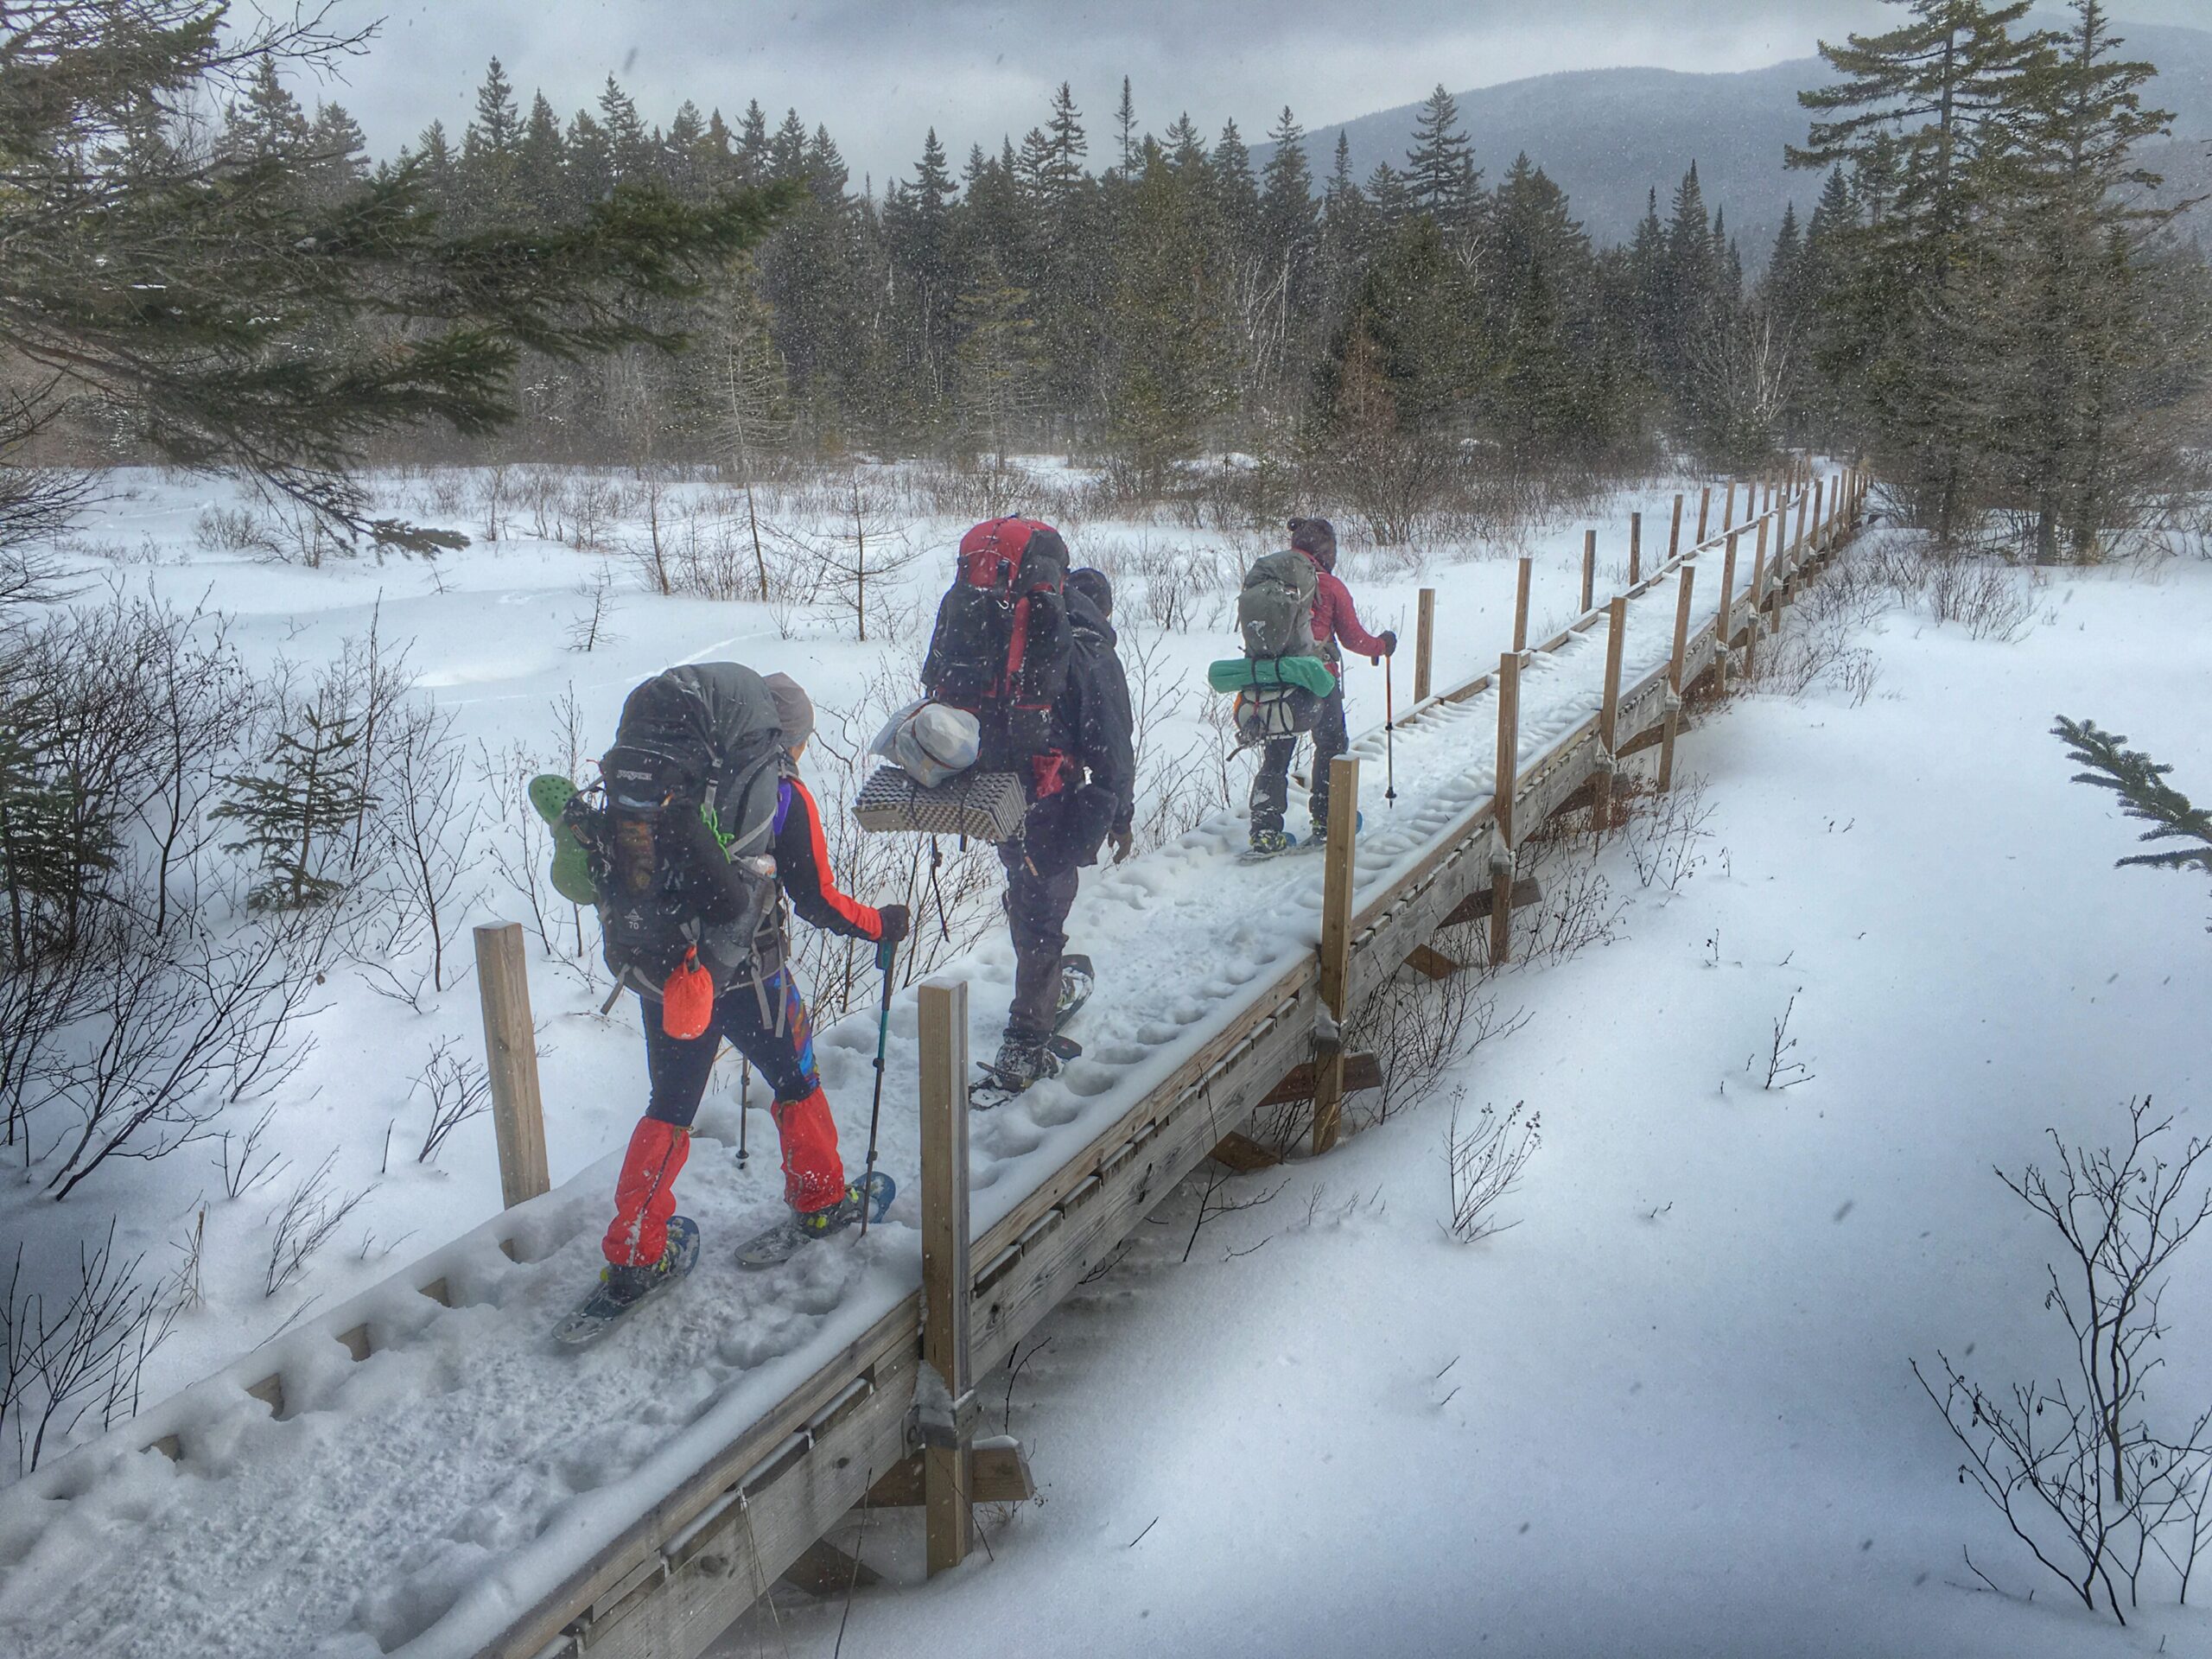 Snowshoers crossing a bridge on Zealand Trail in the White Mountains.